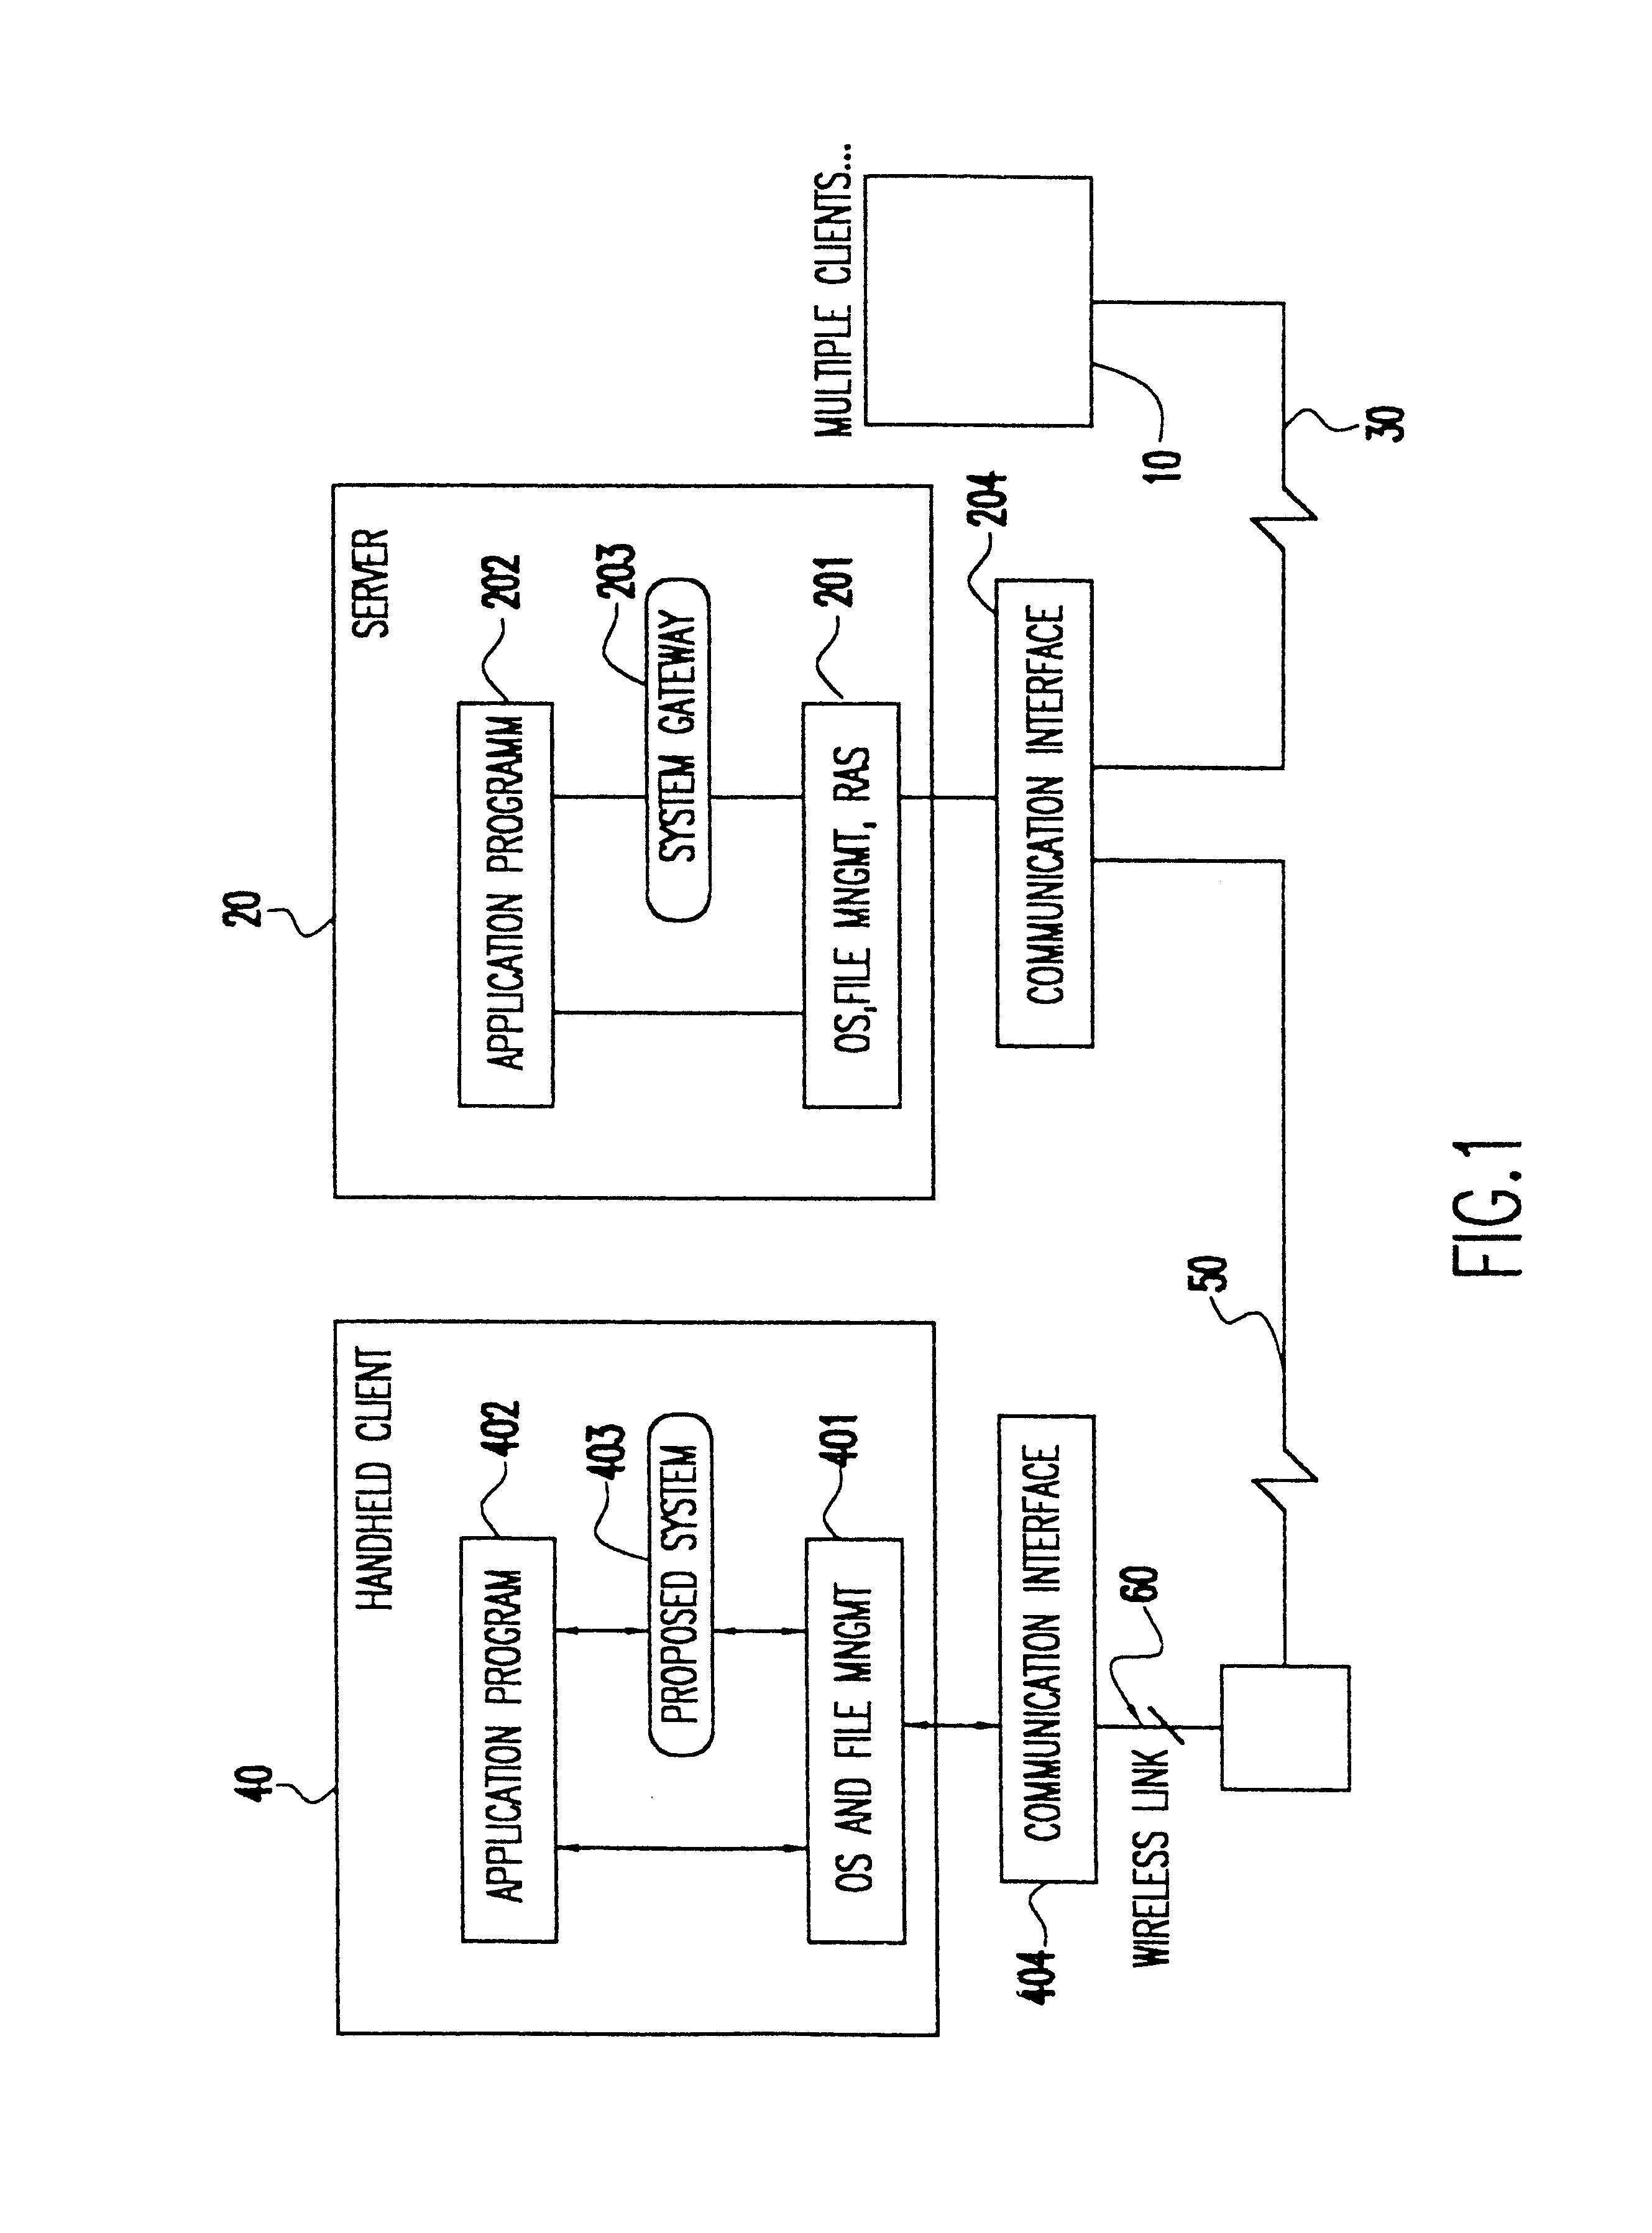 Data transfer mechanism for handheld devices over a wireless communication link